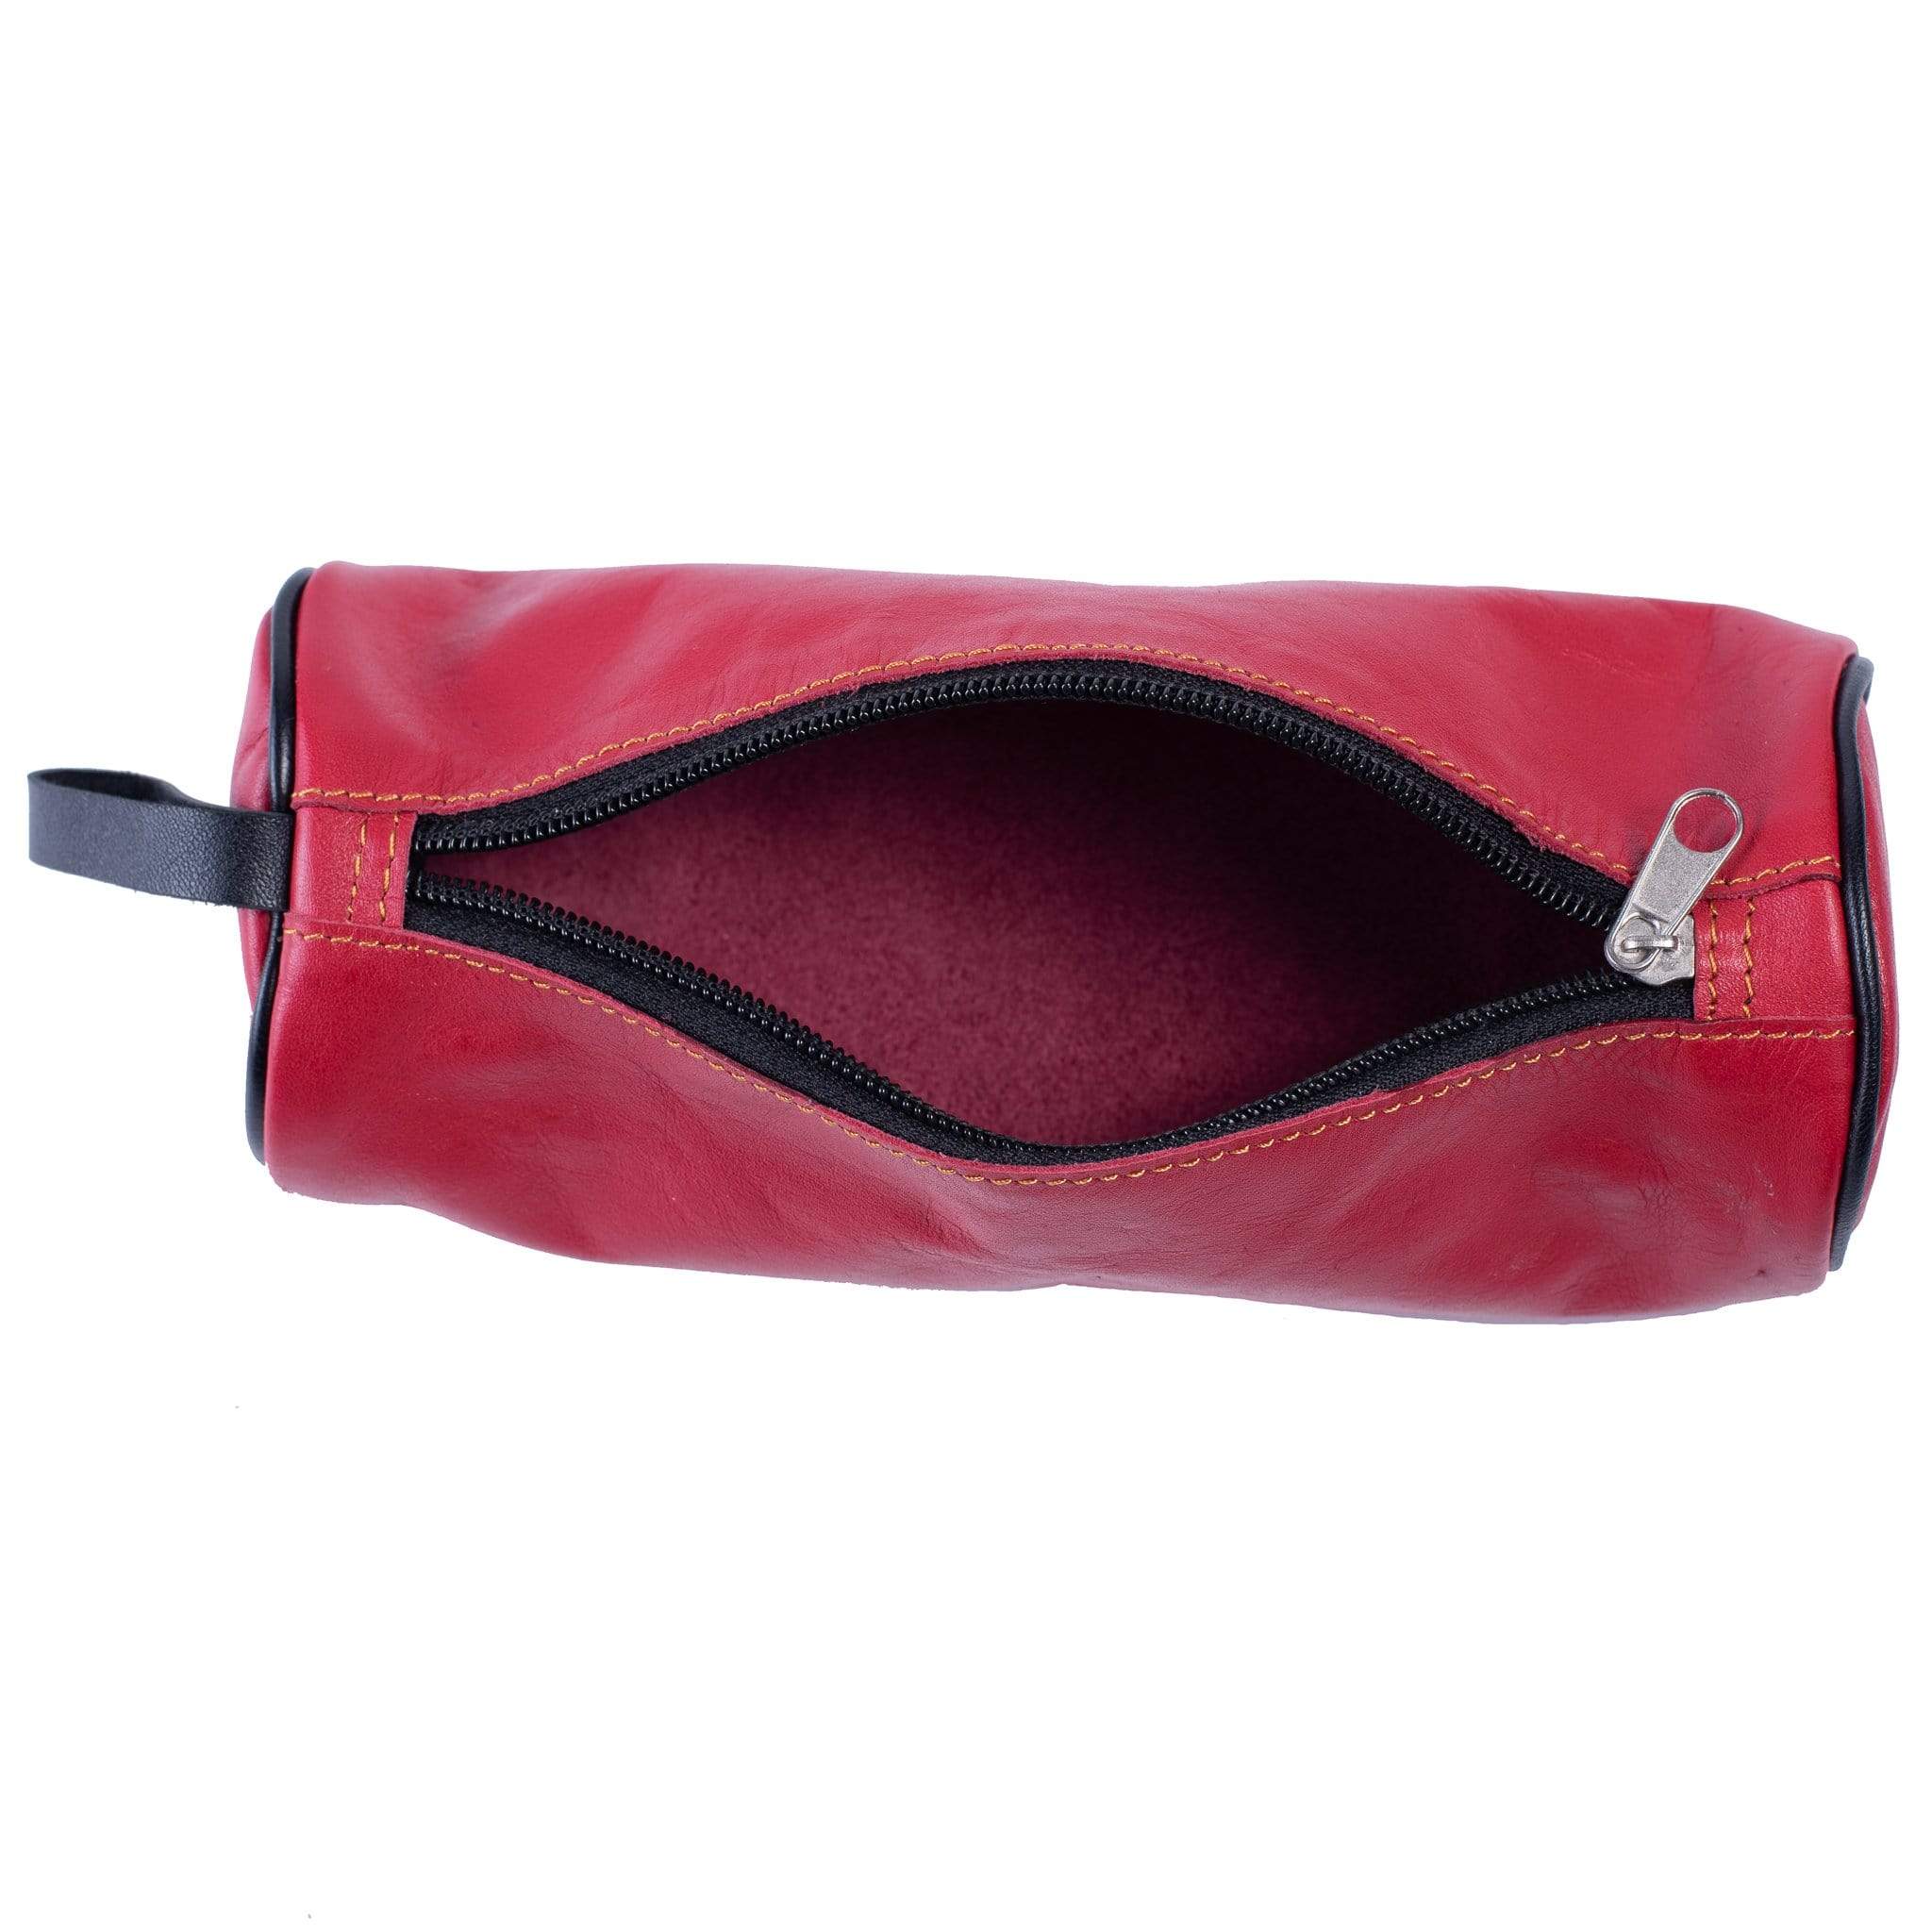 Haya Pencil Case - Luxury Leather Makeup Brush Case, Handcrafted